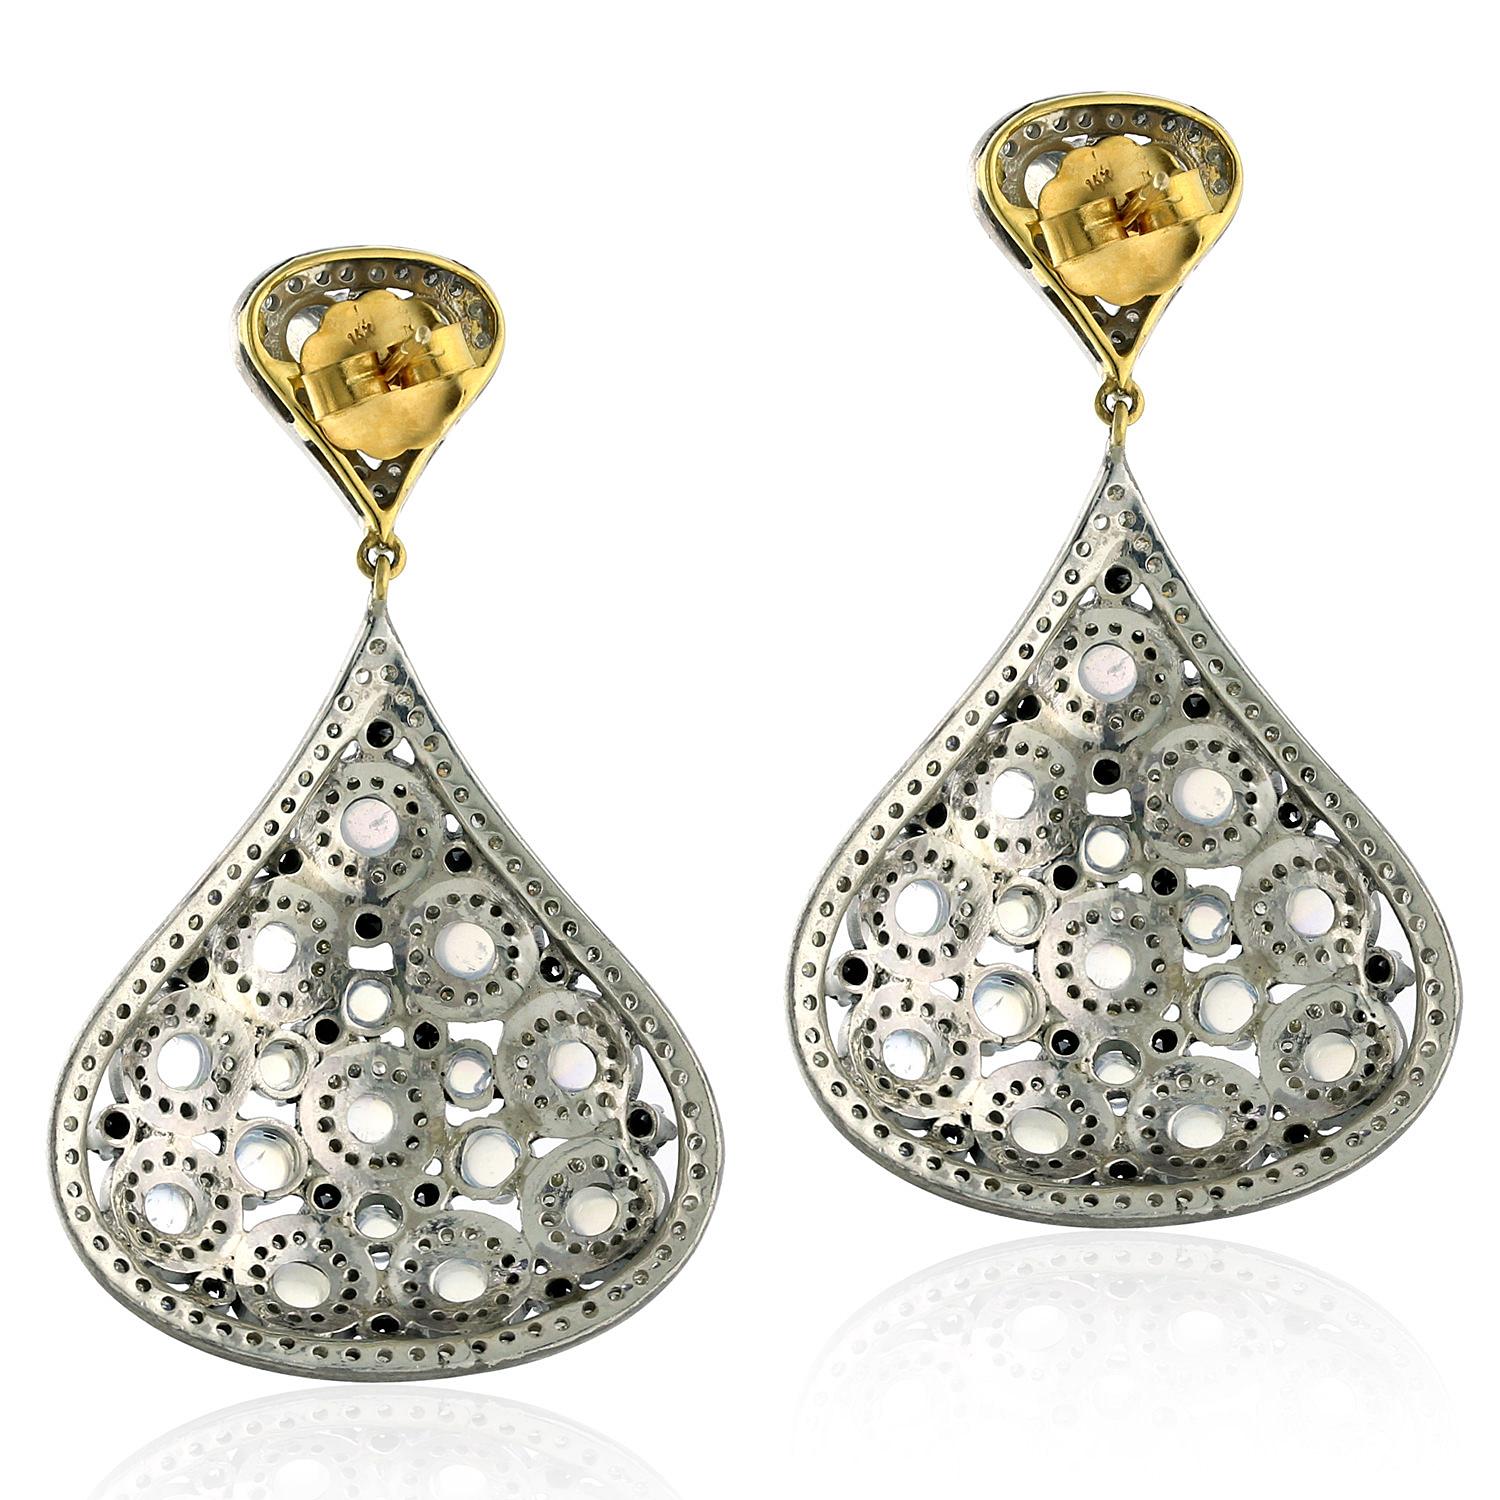 Designer Moonstone and Diamond Earring set in Gold and Silver is perfect earring to pair with that little black dress.

14kt gold: 3.08gms
Diamond: 5.94cts
Silver: 23.42gms
Moonstone: 10.10cts
